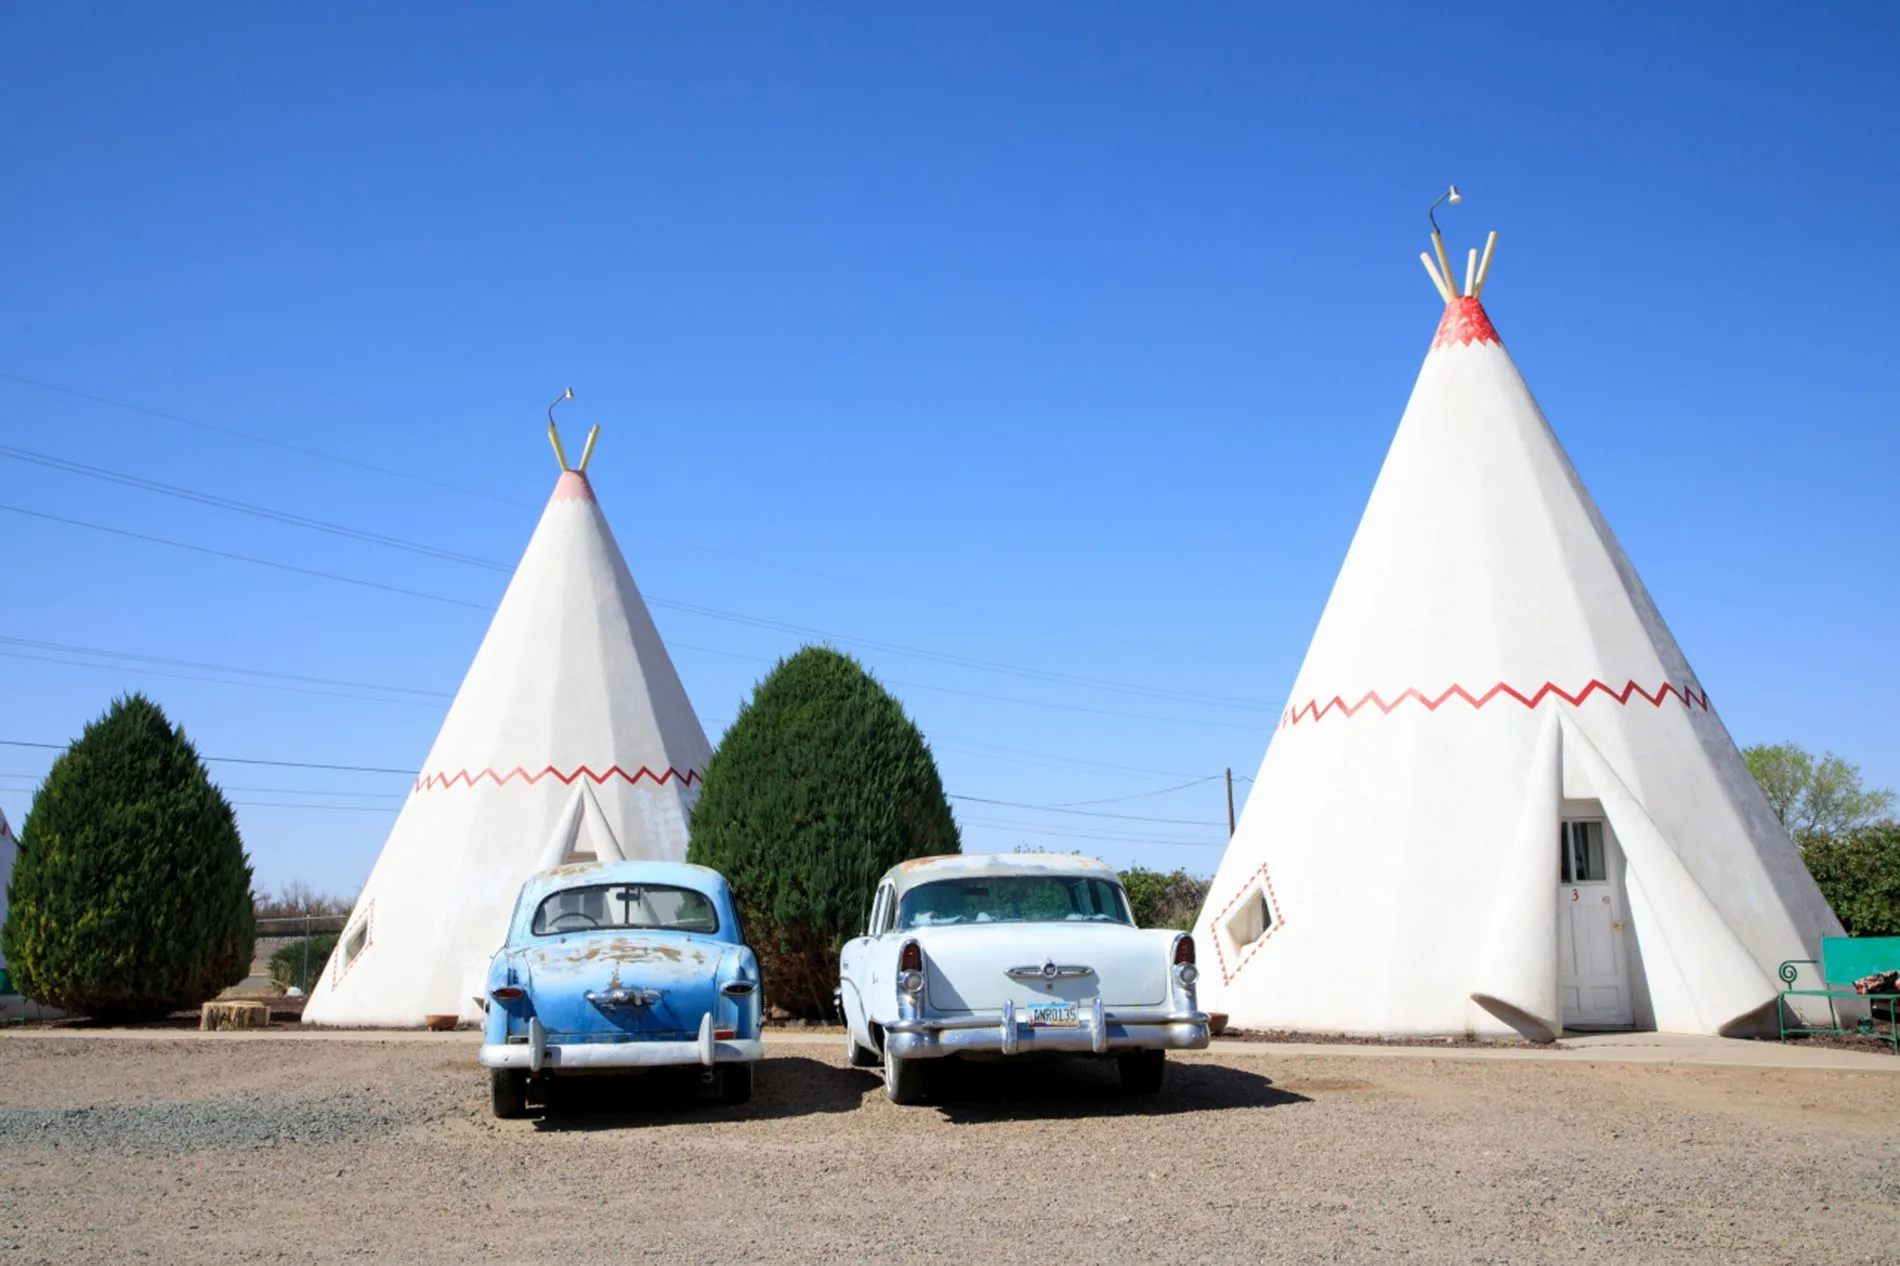 The Wigwam hotel is one of the many sites to see along I40.